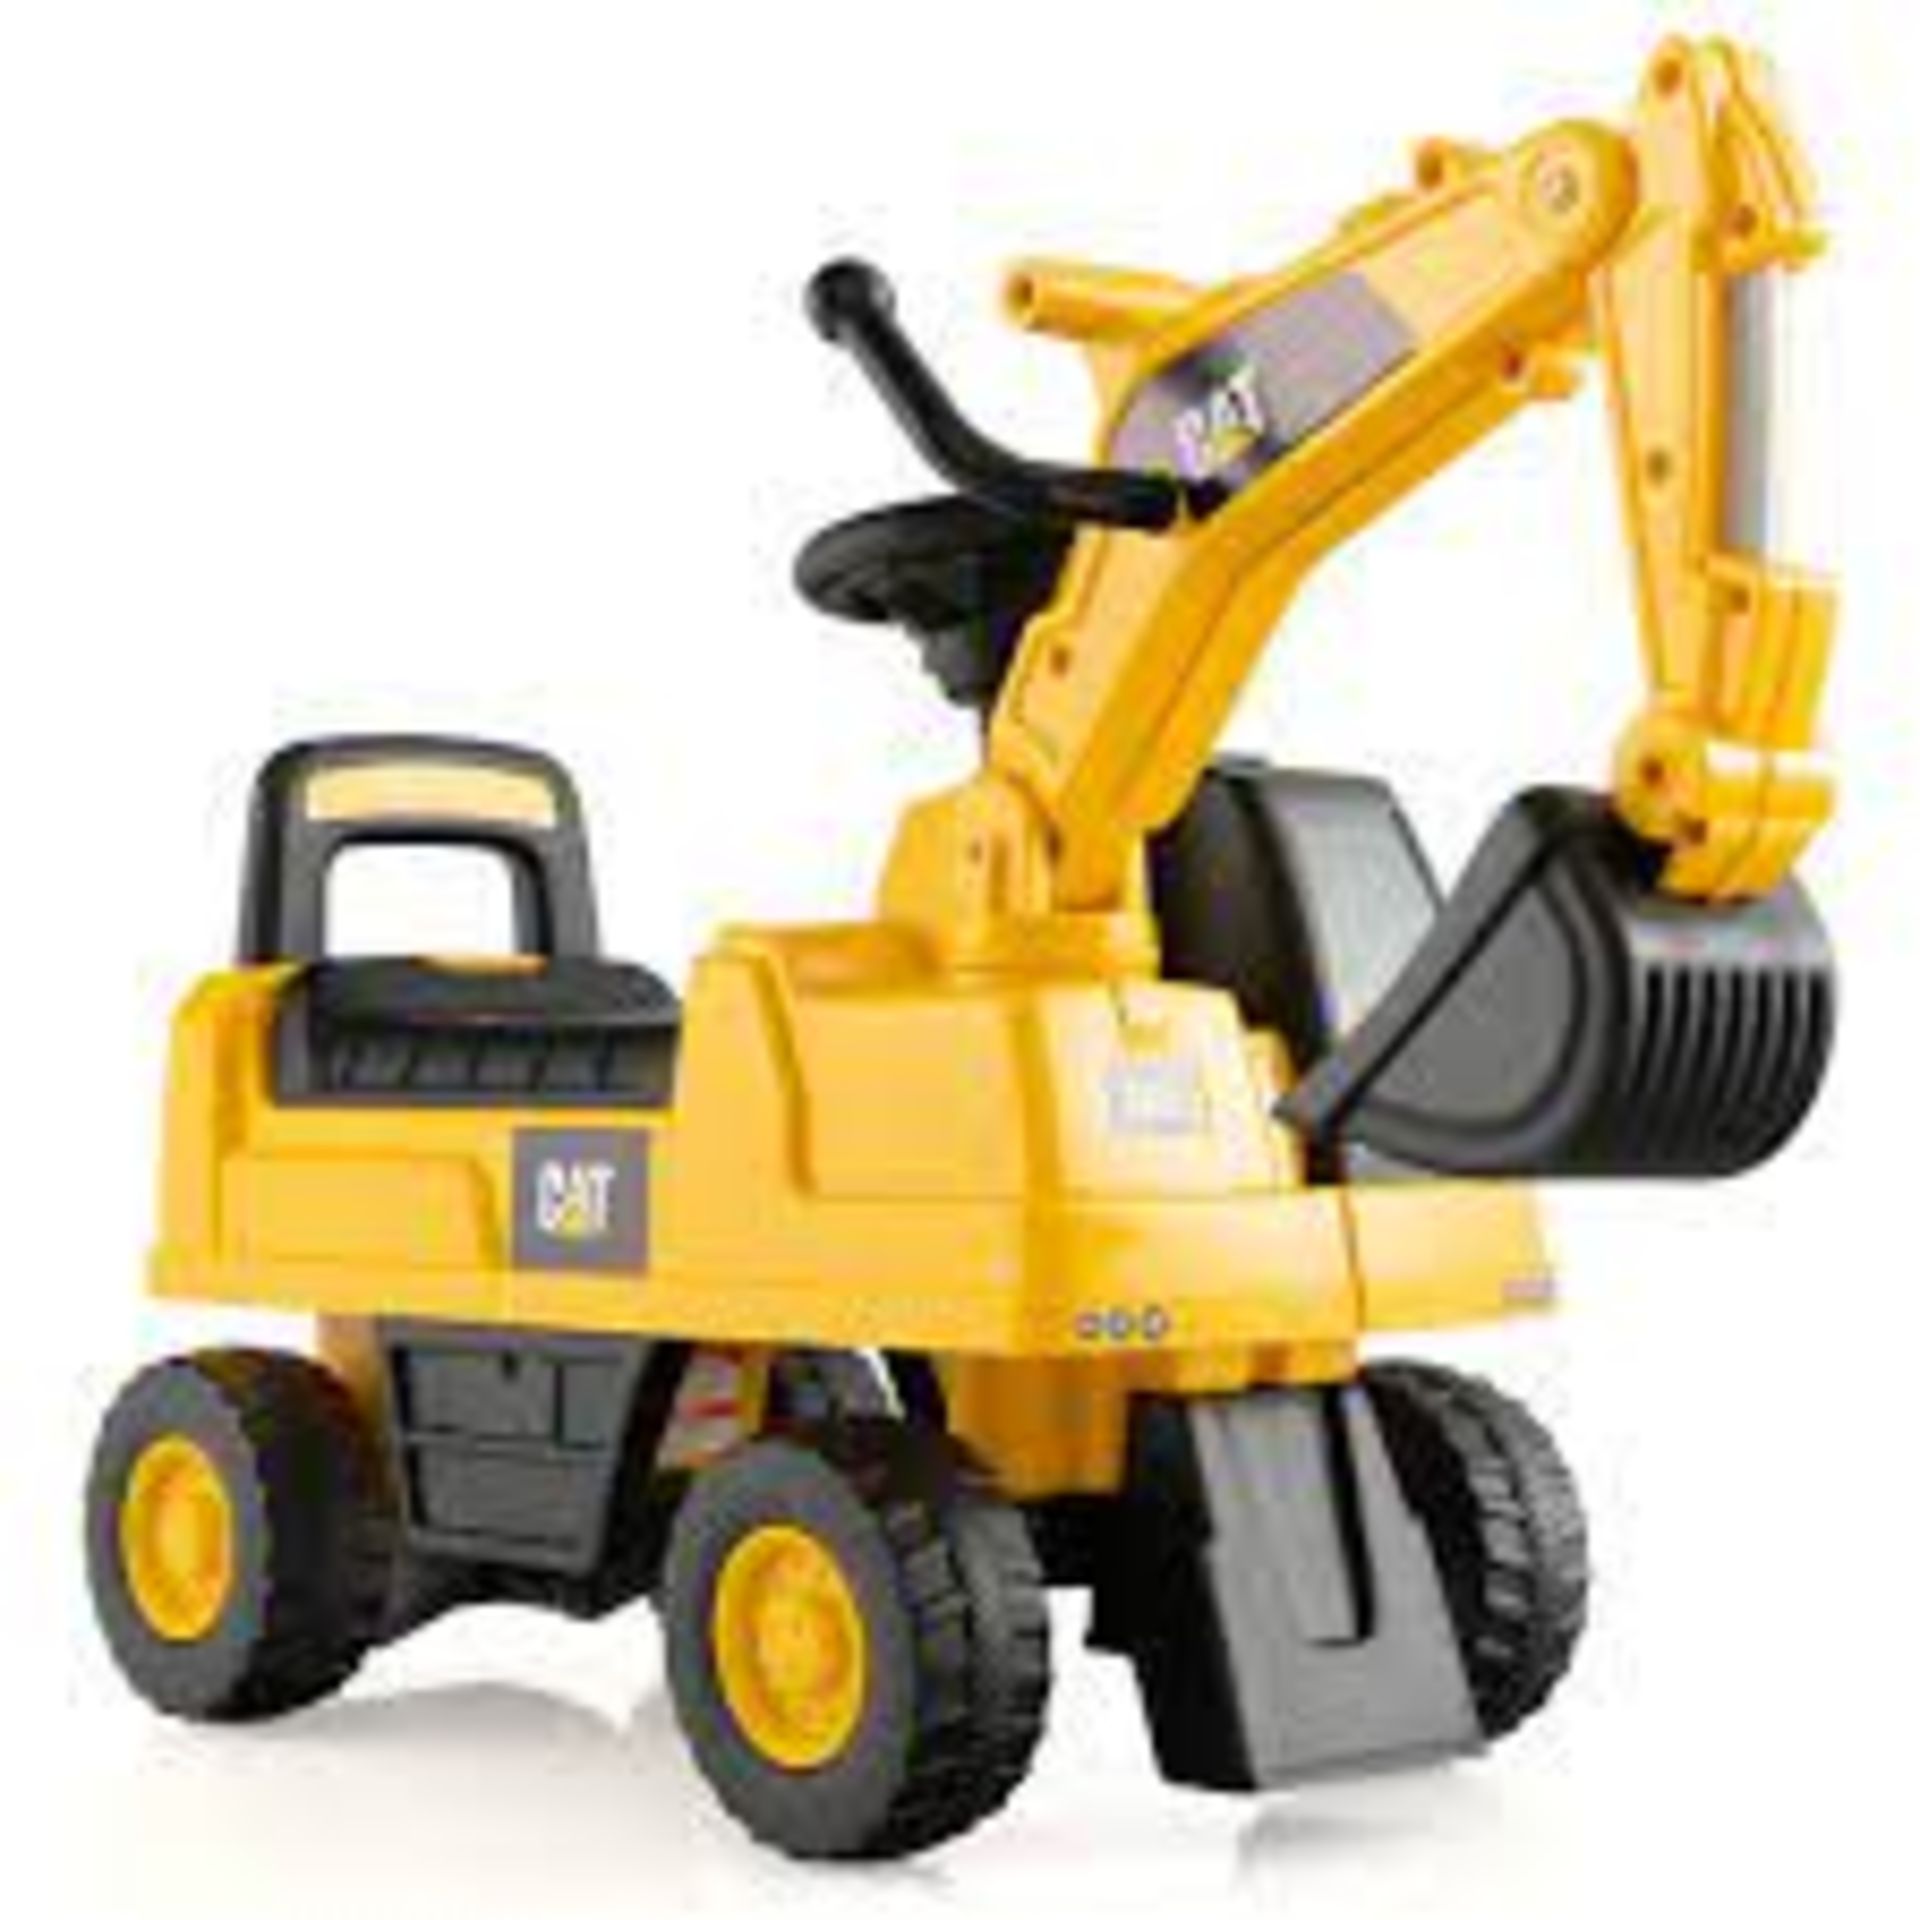 Kid's Rid-On Digger with Rotatable Digging Bucket-Yellow - ER53